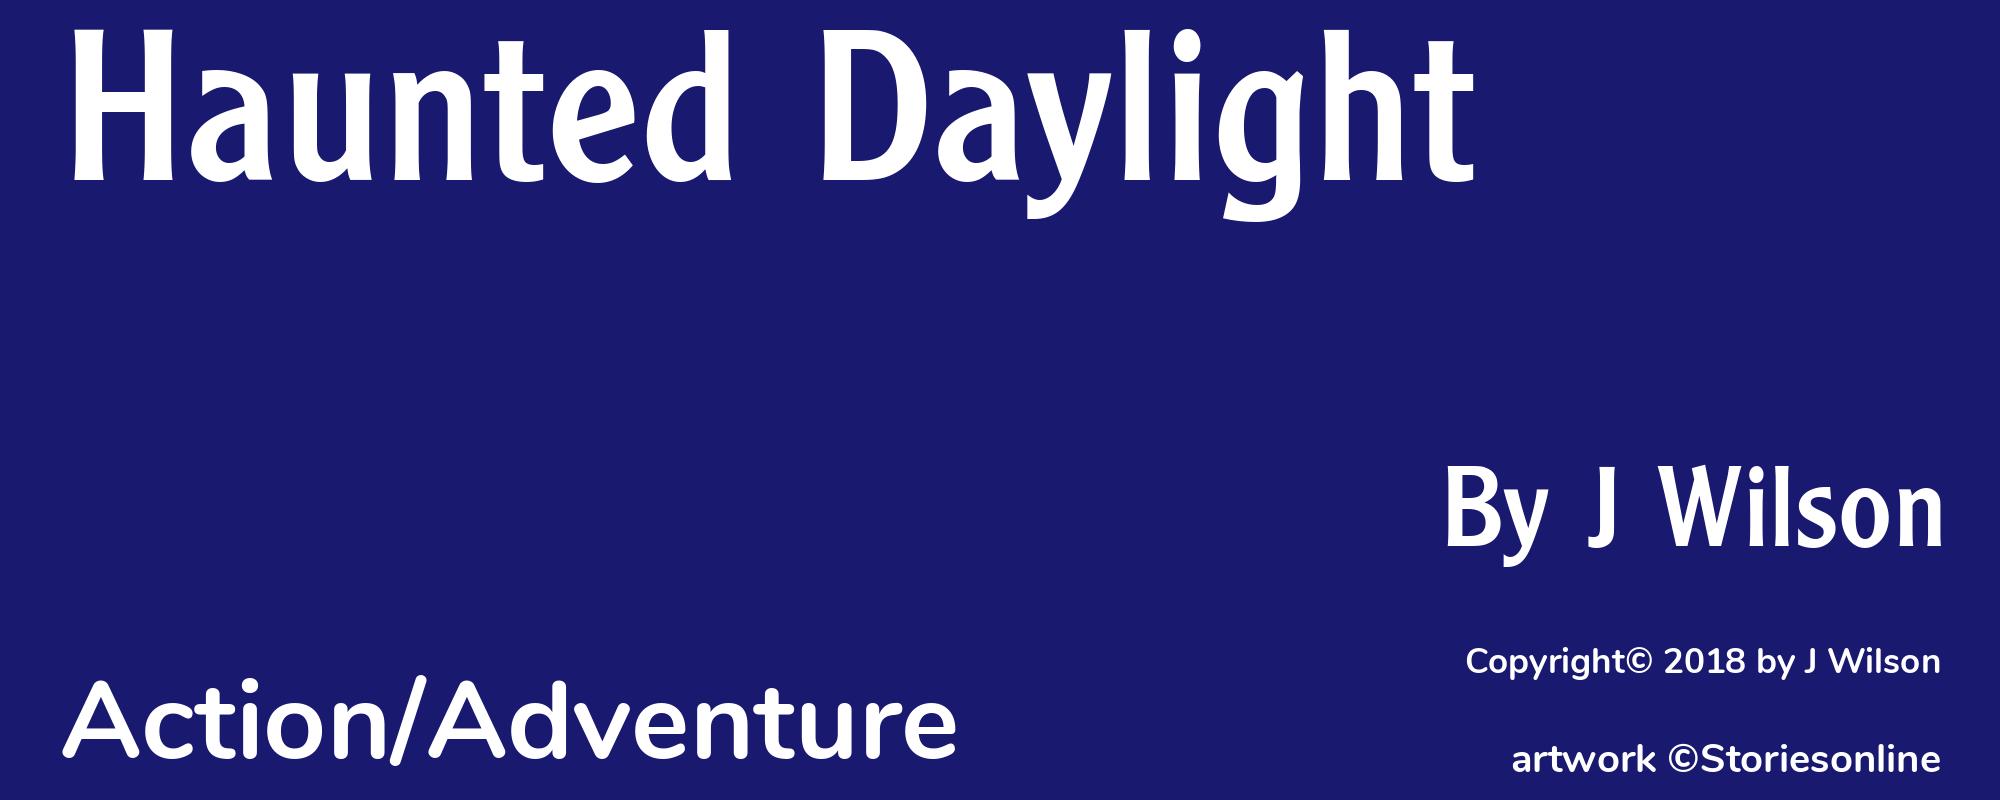 Haunted Daylight - Cover